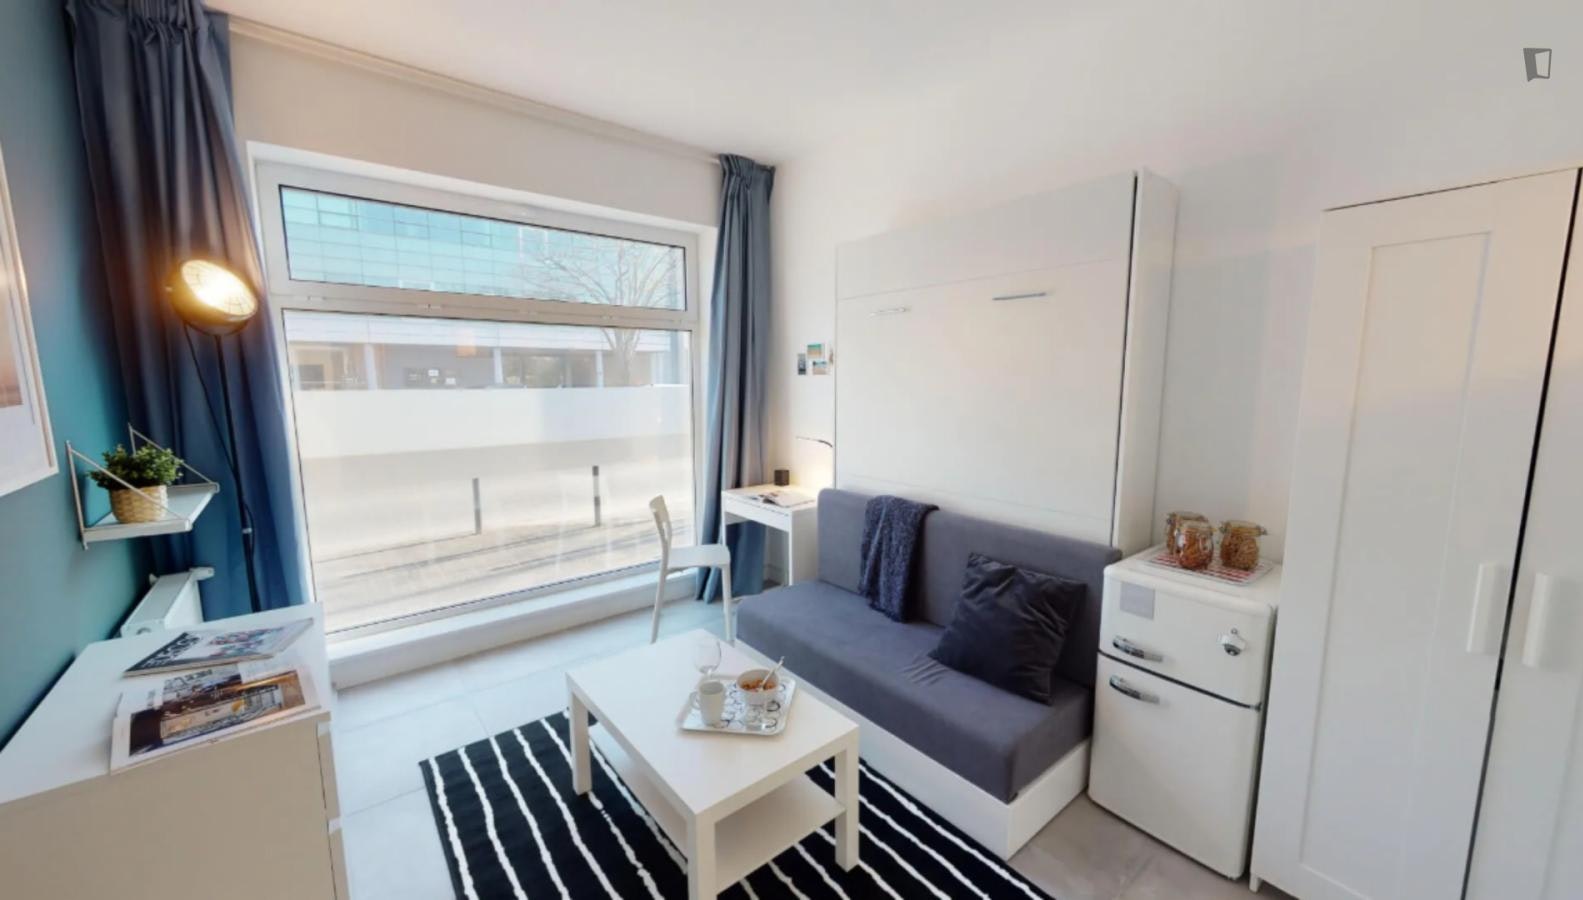 Stylish double ensuite bedroom in a 16-bedroom apartment close to Place Ravezies